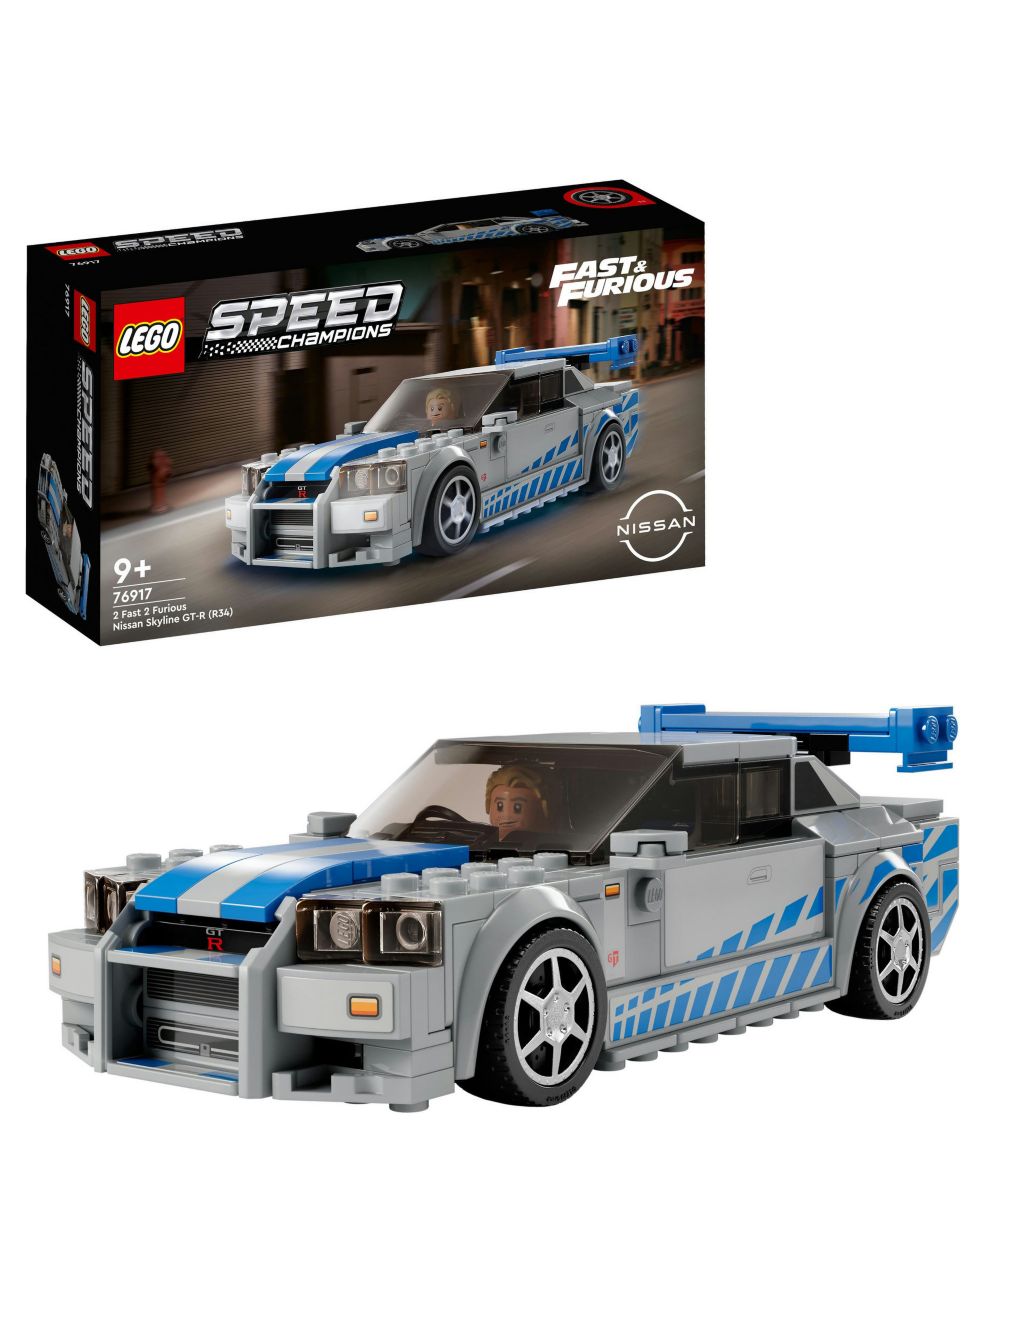 LEGO Speed Champions 2 Fast 2 Furious Nissan Skyline (9+ Yrs) 2 of 7